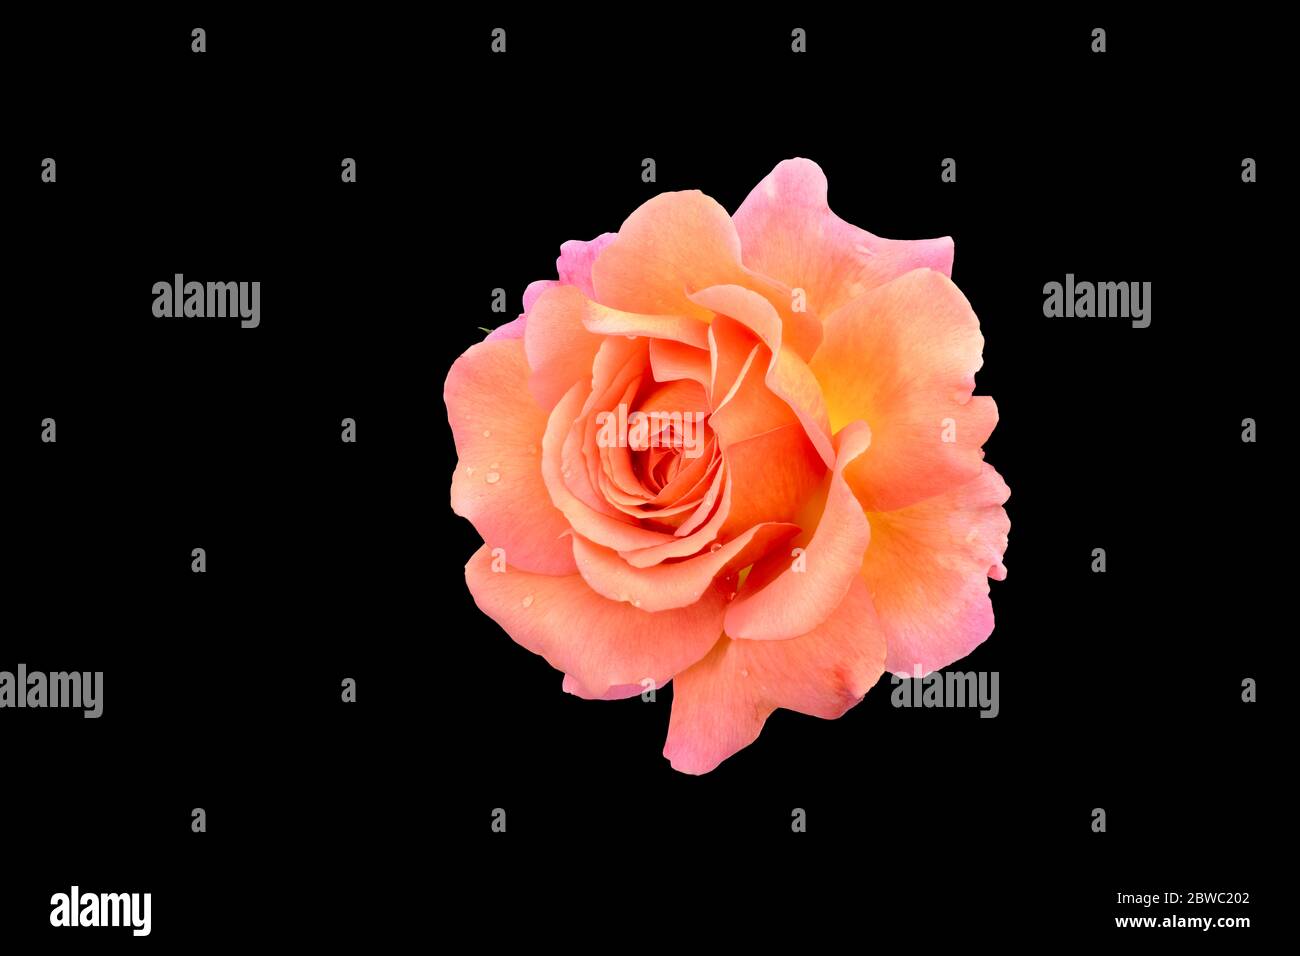 macro of an orange pink rose blossom on black background, bright colored fine art still life,single isolated bloom,detailed texture,rain drops Stock Photo